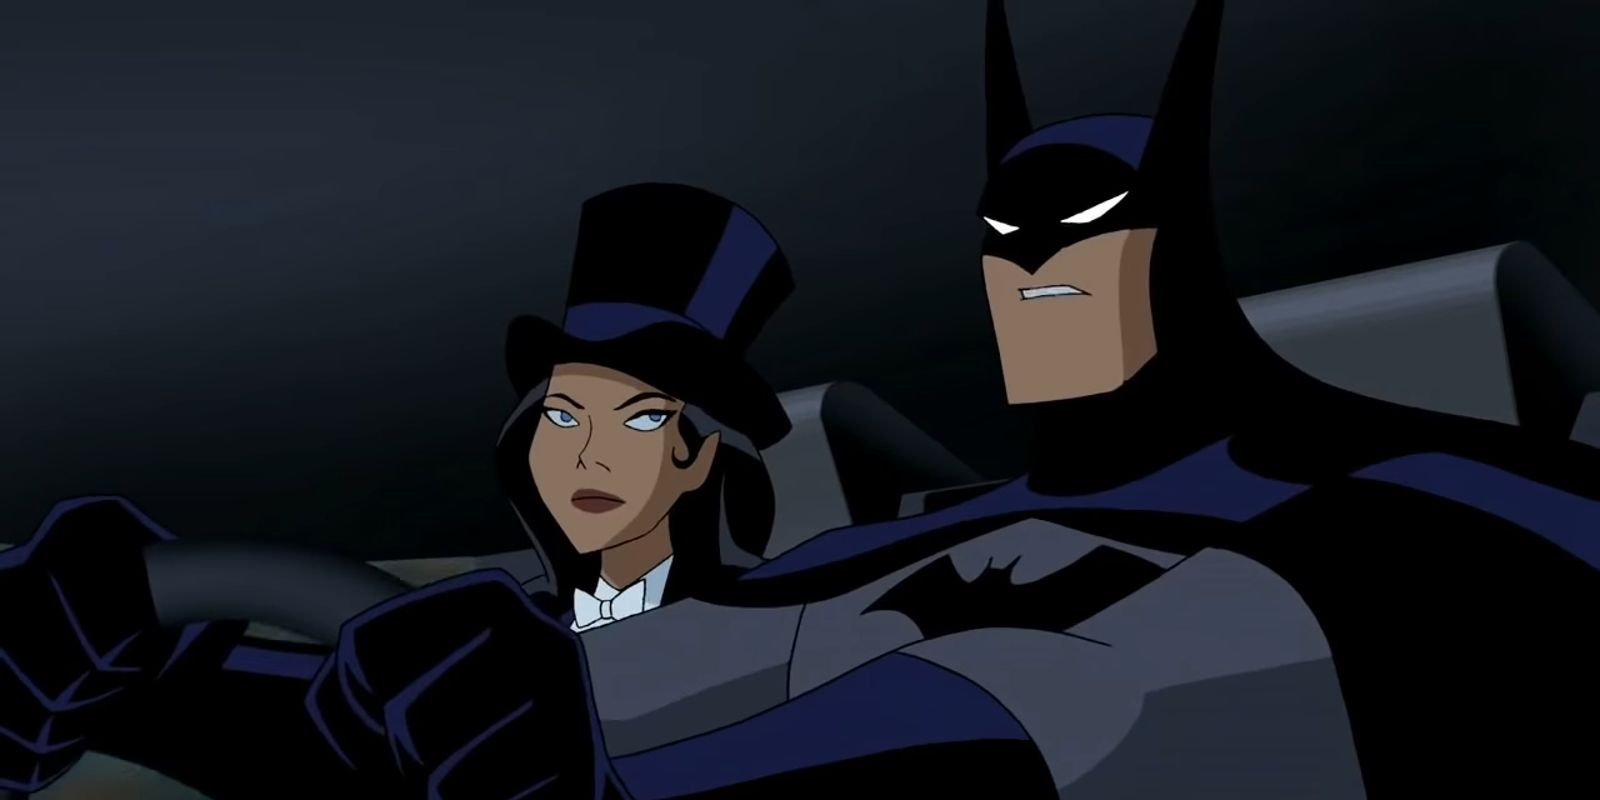 10 Best Relationships In The DCAU Ranked